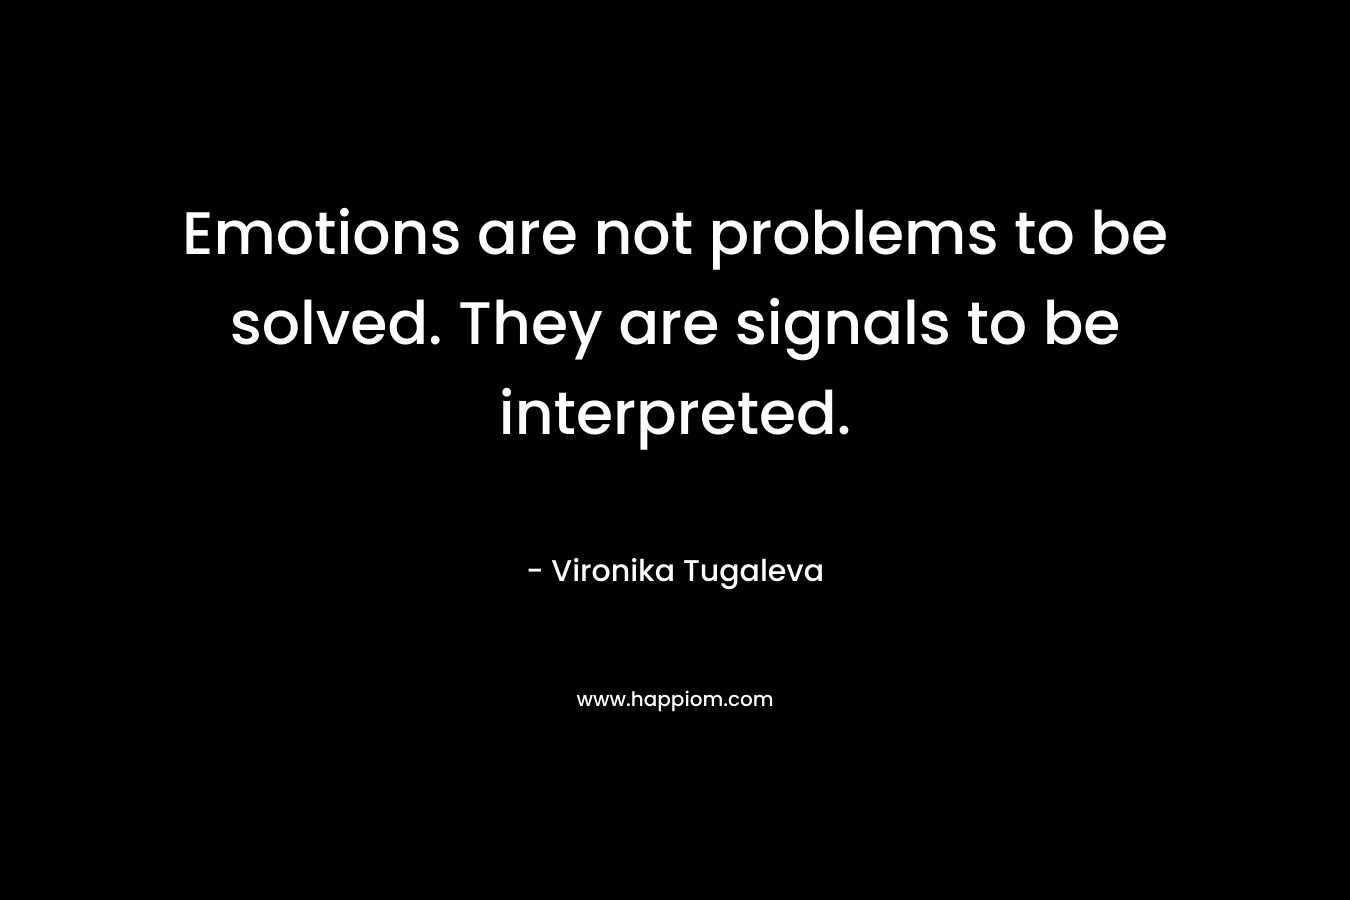 Emotions are not problems to be solved. They are signals to be interpreted.